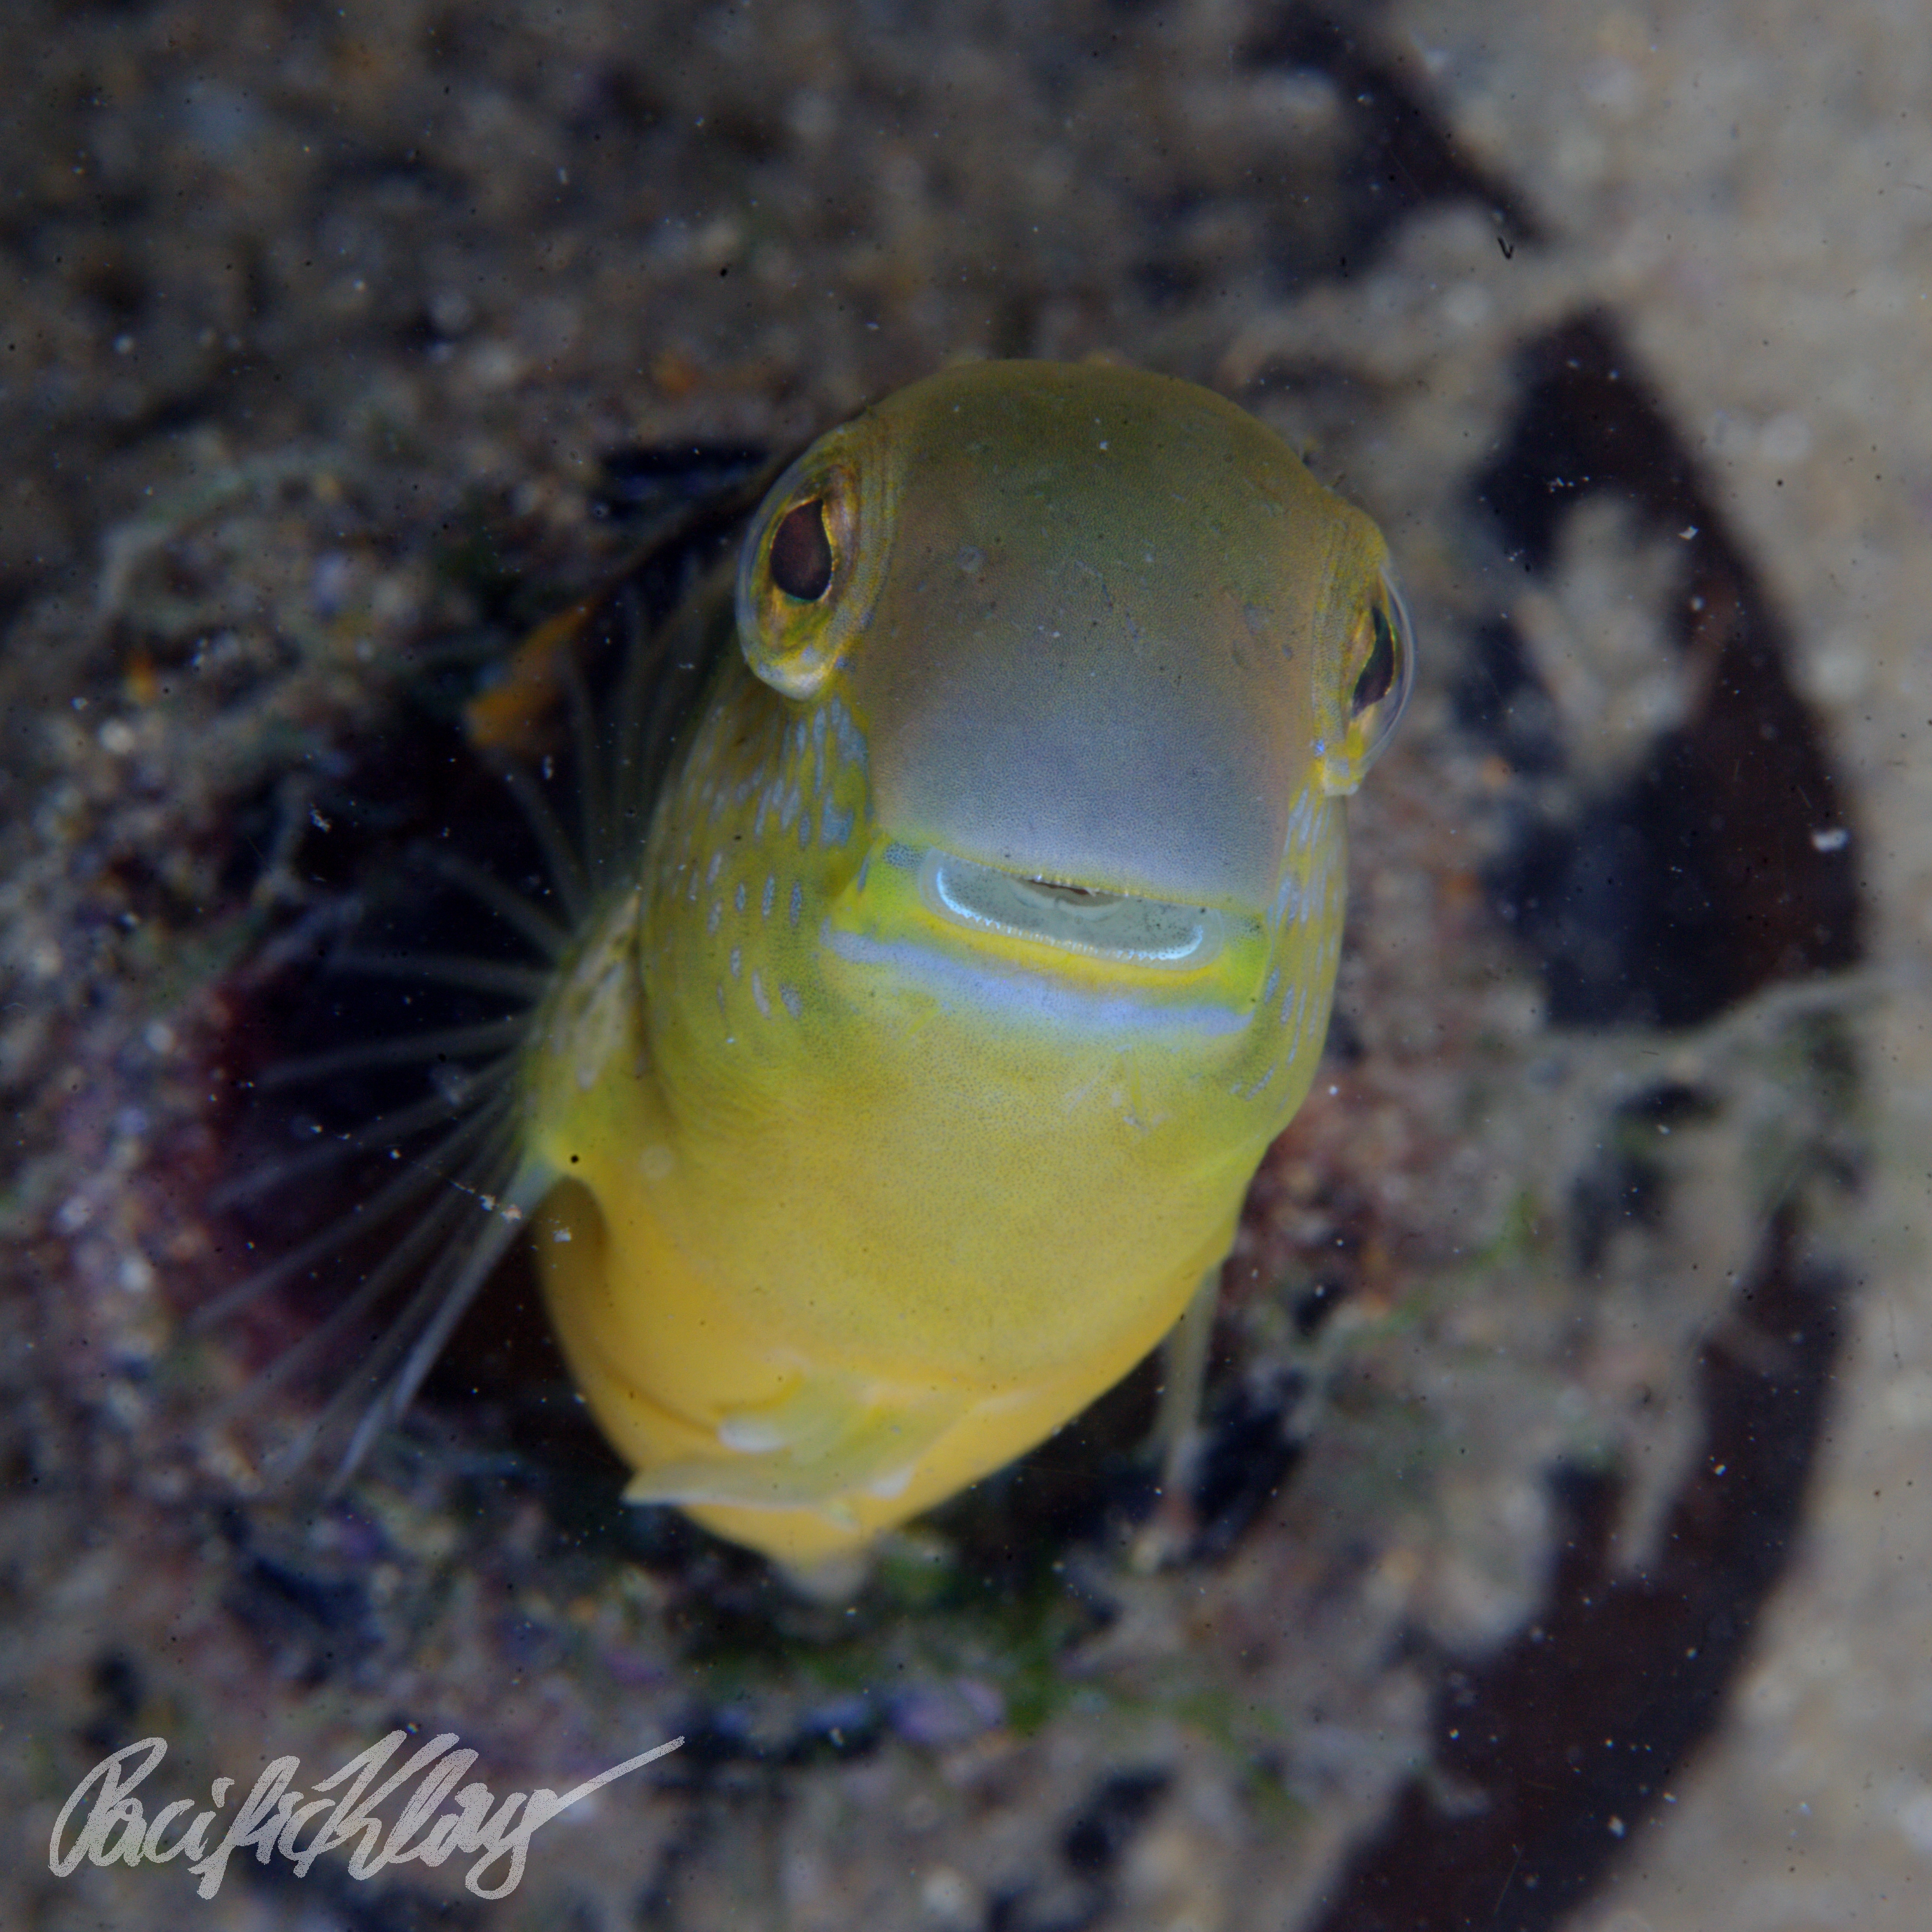 blenny by Pacificklaus